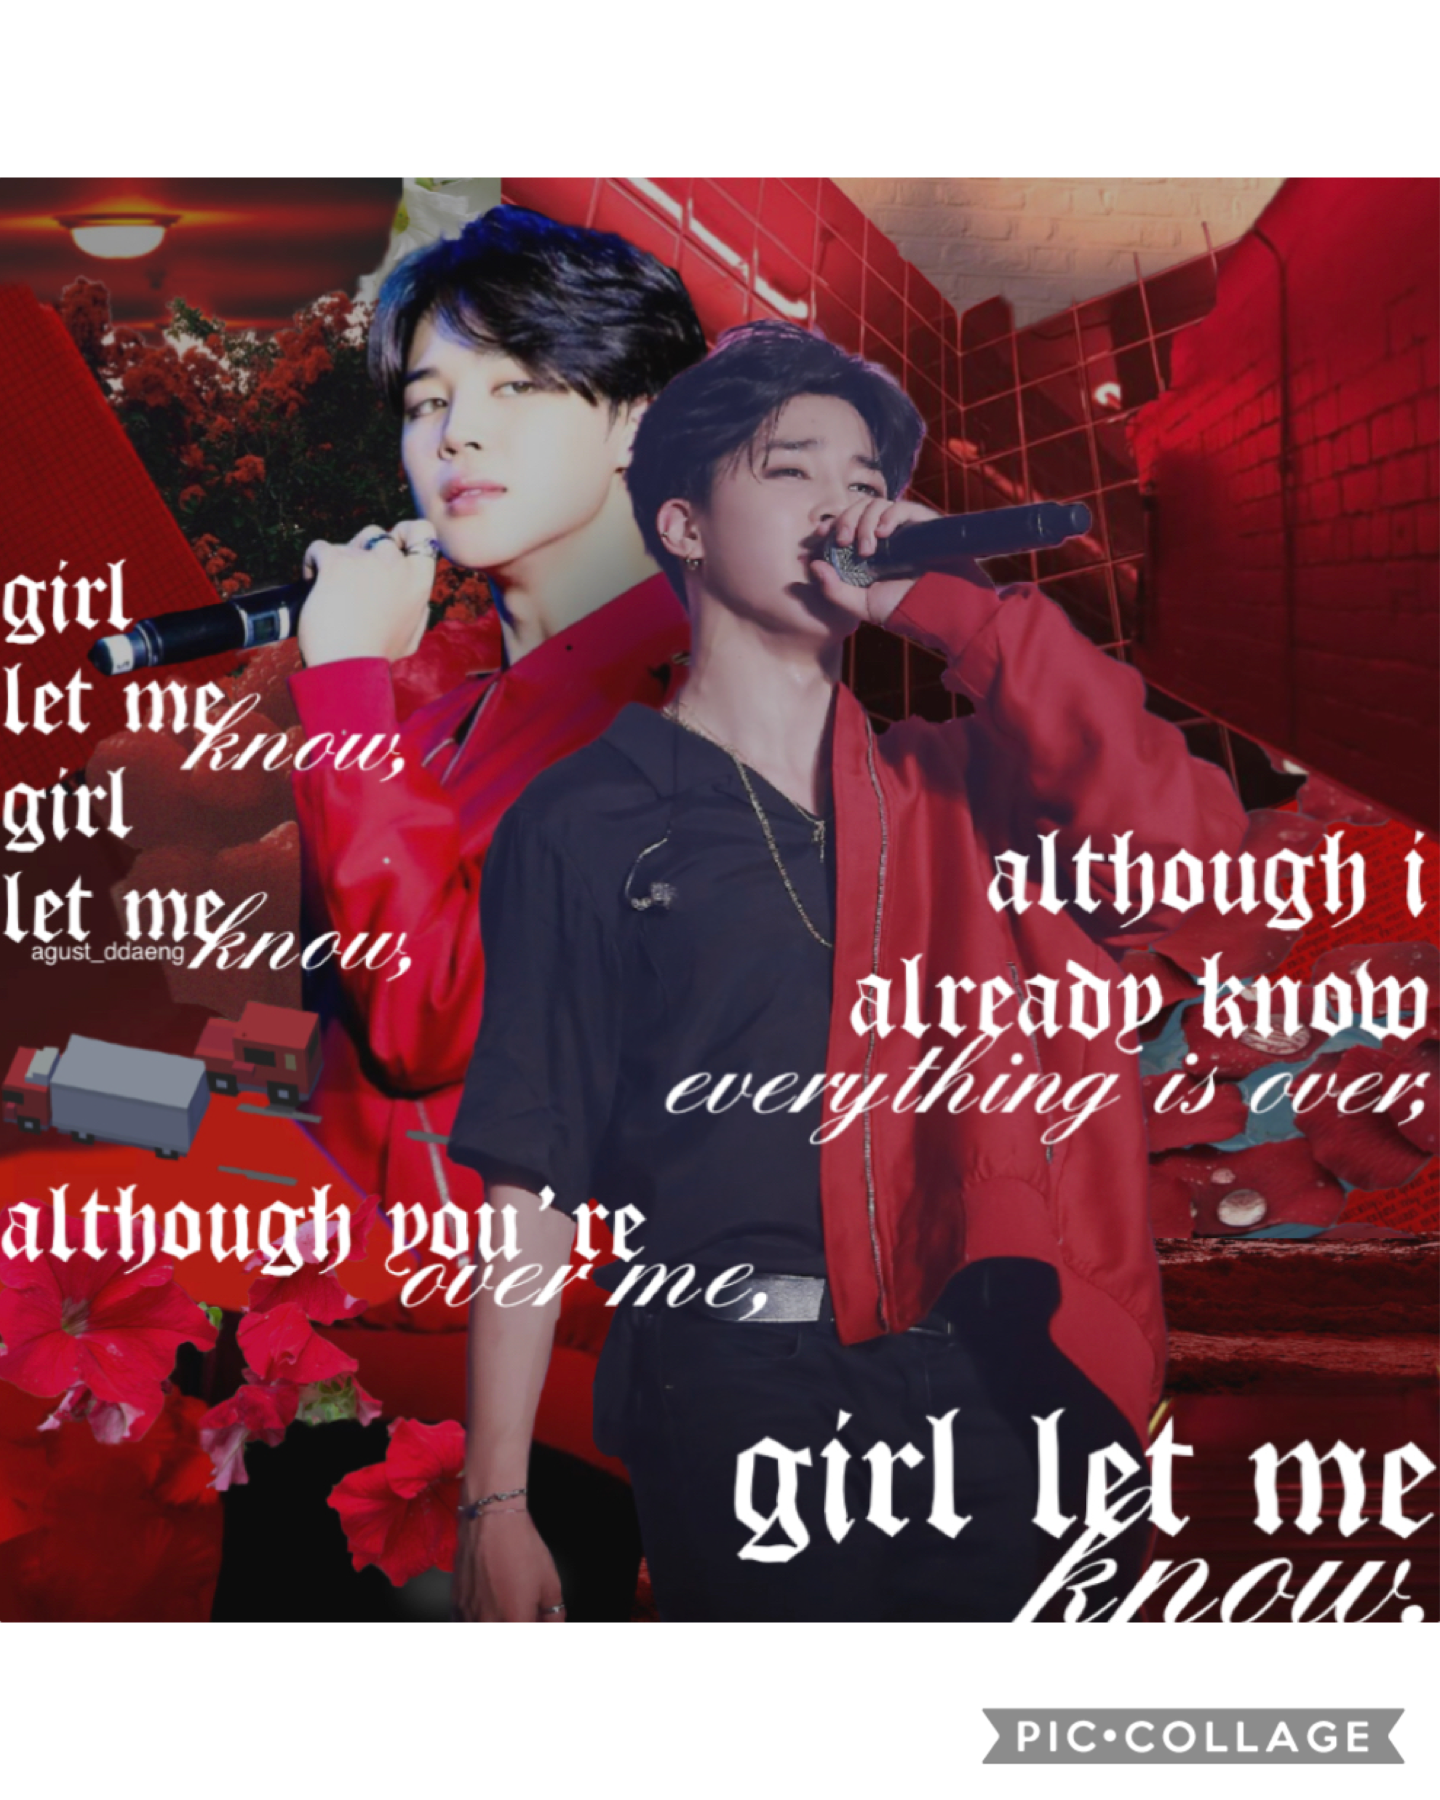 ||🍷|| LET ME KNOW - BTS ||🍷||
[ 5 - 19 - 20 ] 

another caption change🤠 ; this is for seesee (@Starrysky-) bc i post too much of yoongi :’) ; im not rlly okay atm ahaha ; ive kinda given up on life yk? ; I love you so much, please remember that🥺 — august